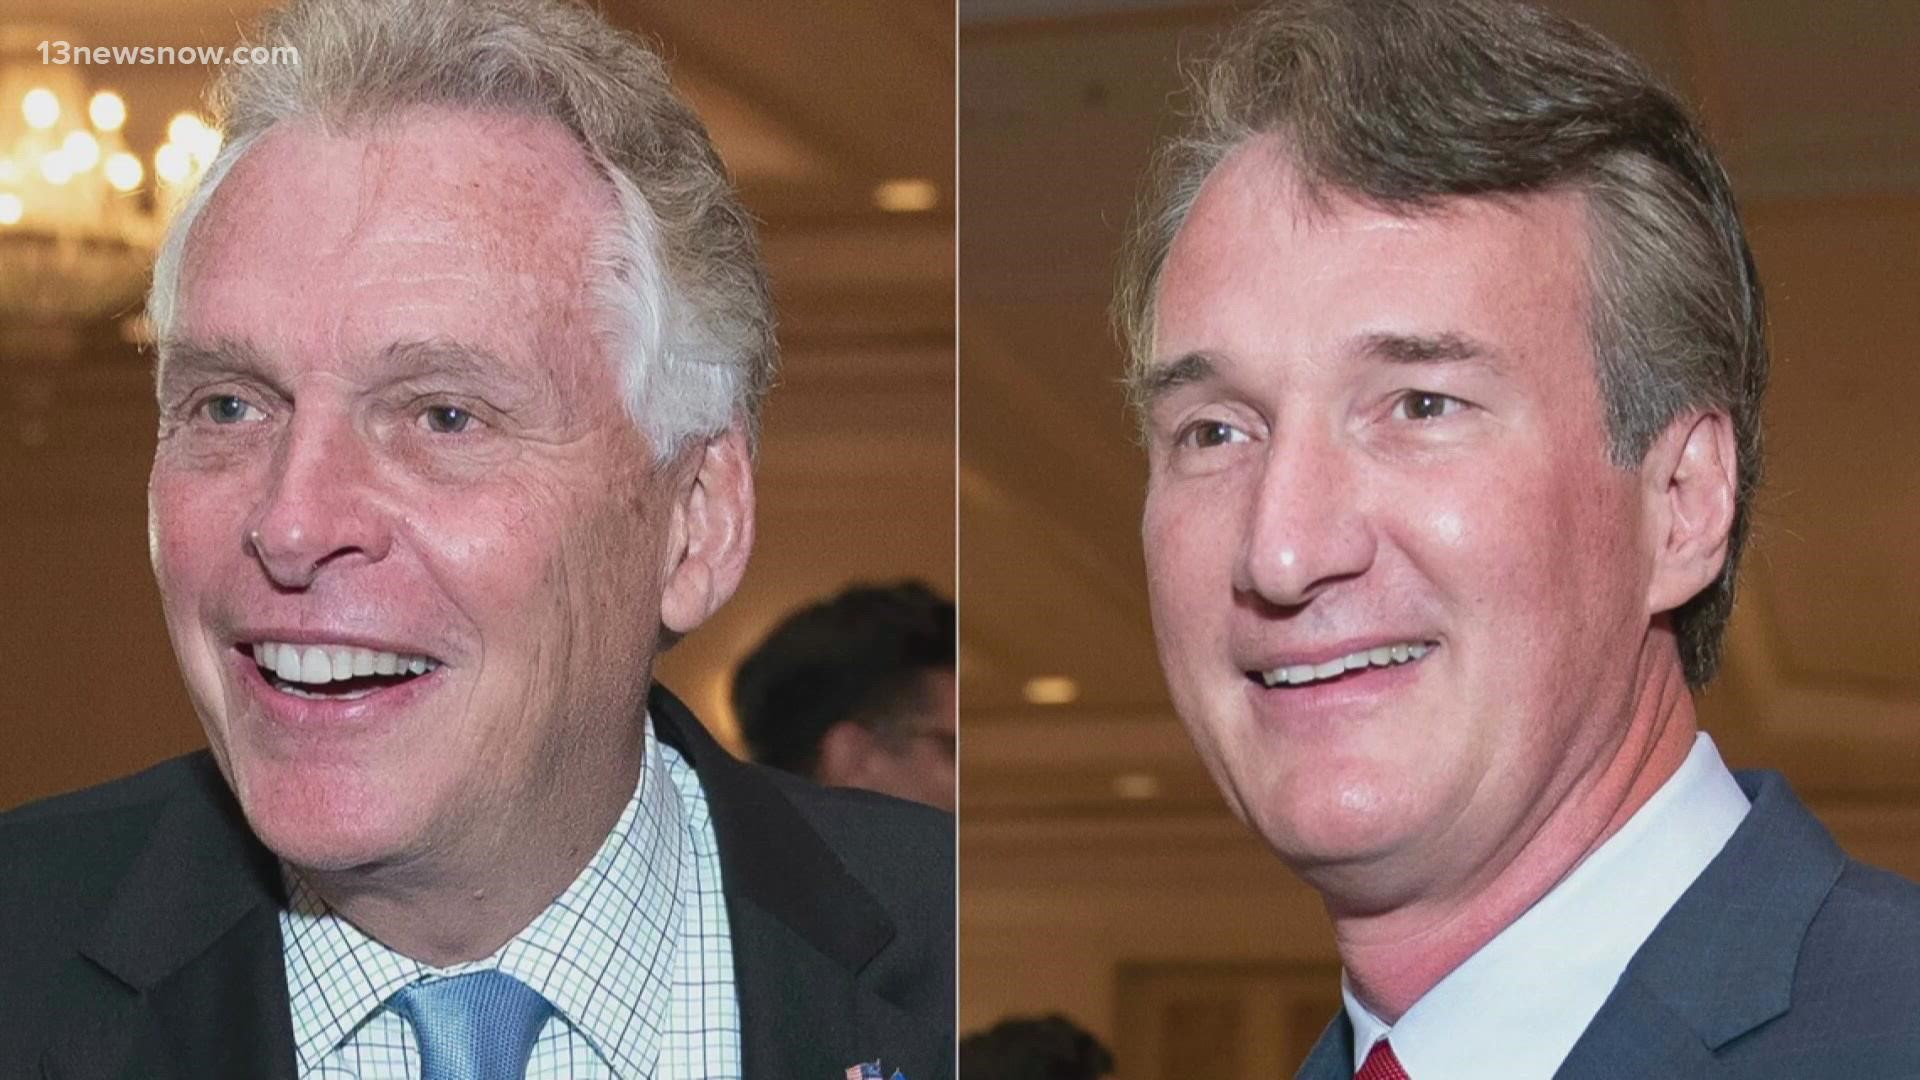 A new CNU Wason Center Poll out Wednesday shows Democrat Terry McAuliffe with a slim one-point lead over Republican Glenn Youngkin.